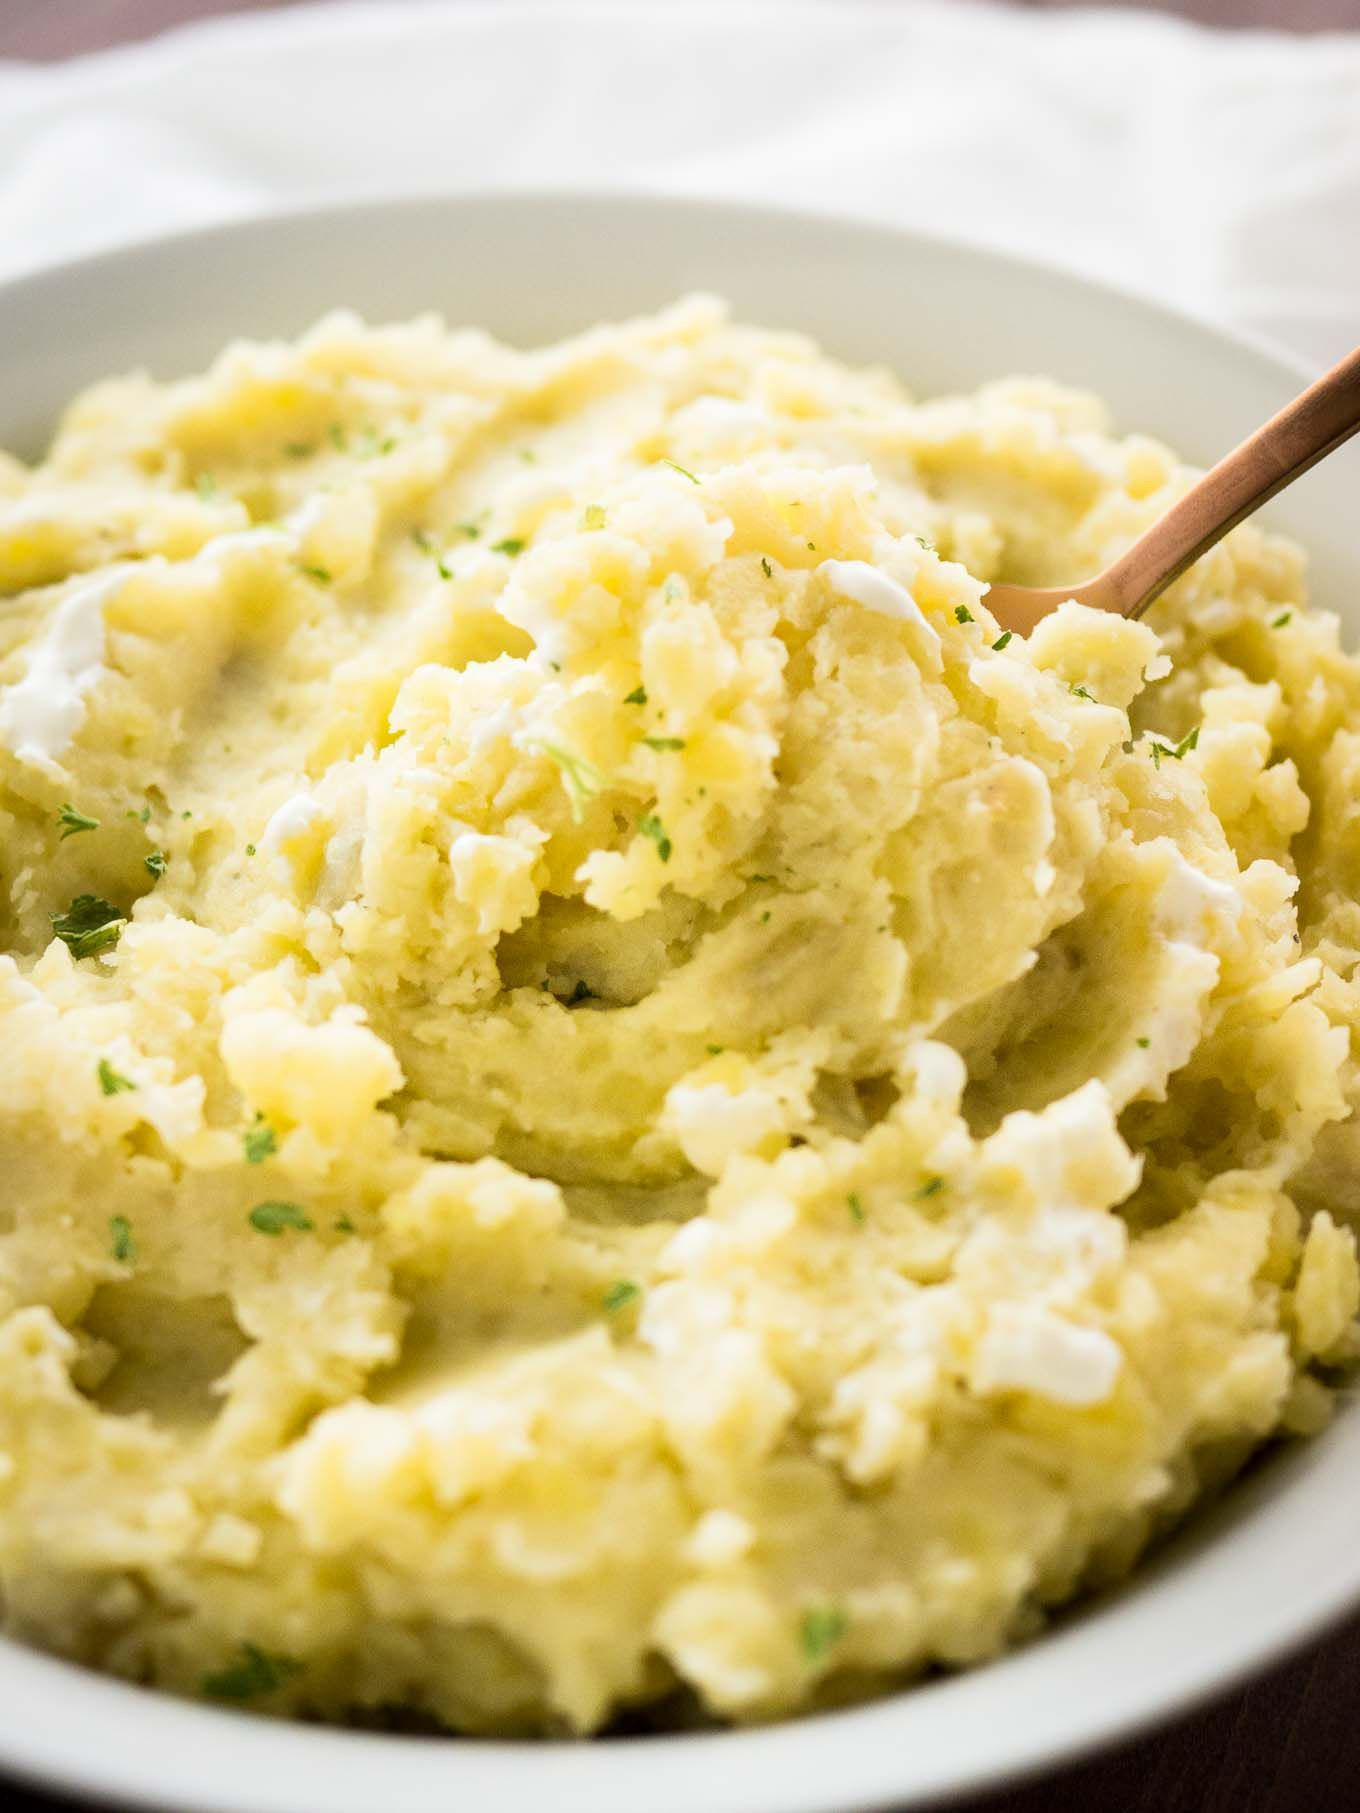 Mashed Potatoes In Crockpot Make Ahead
 This Creamy Crock Pot Mashed Potatoes Recipe is SO easy